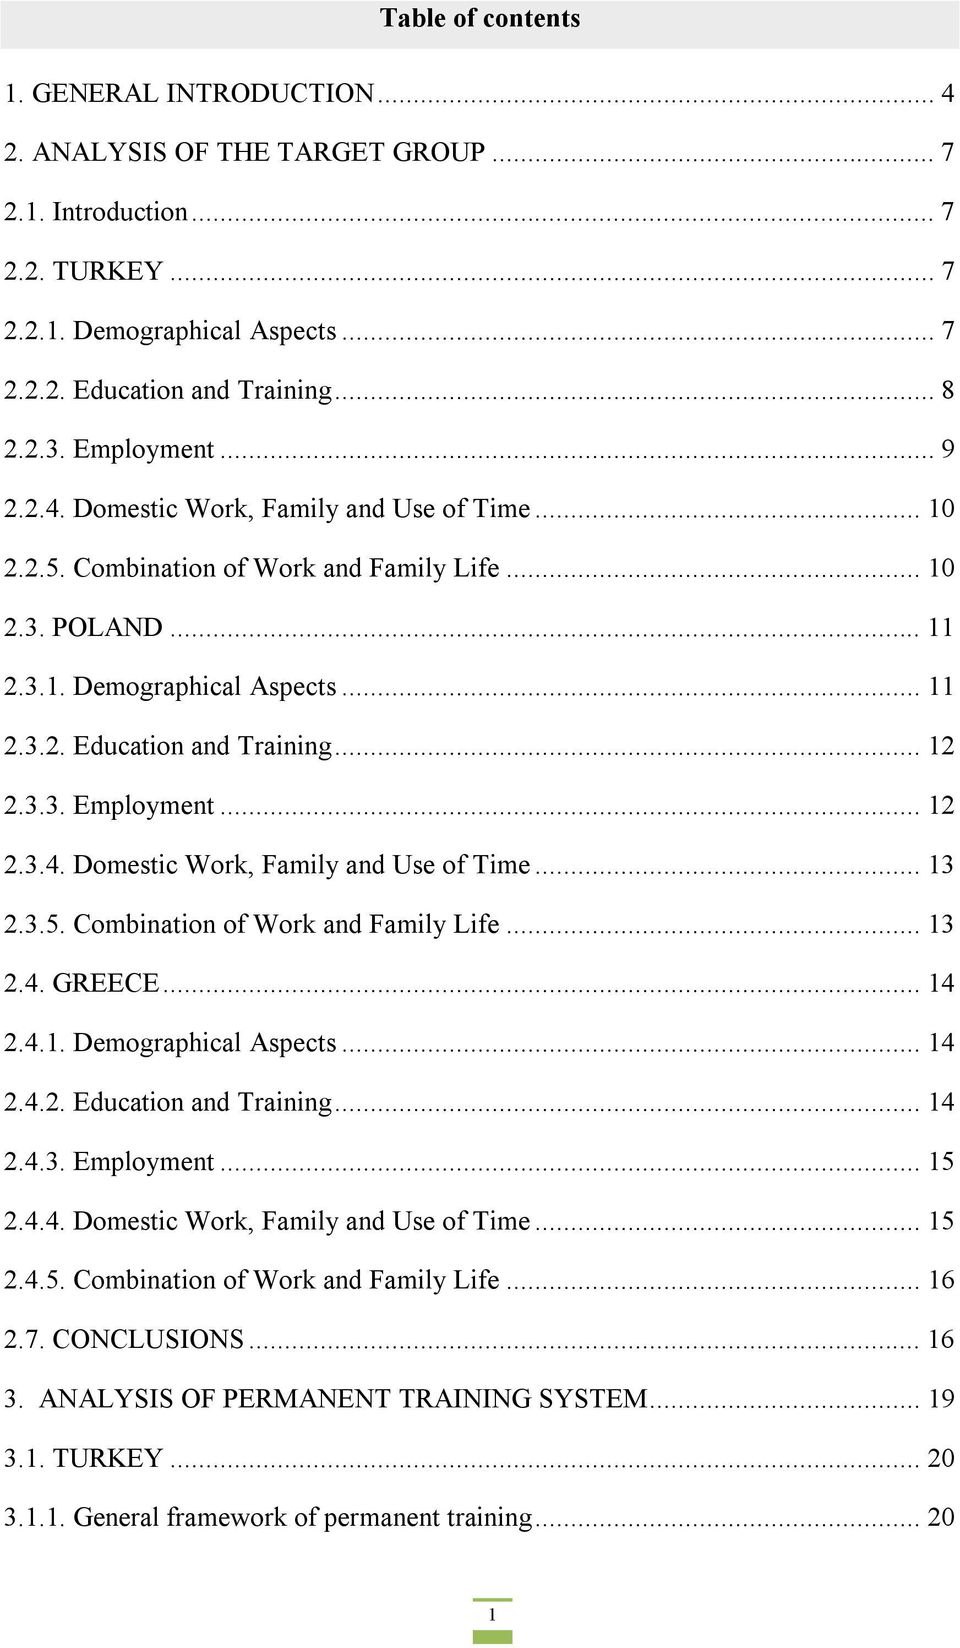 .. 12 2.3.3. Employment... 12 2.3.4. Domestic Work, Family and Use of Time... 13 2.3.5. Combination of Work and Family Life... 13 2.4. GREECE... 14 2.4.1. Demographical Aspects... 14 2.4.2. Education and Training.